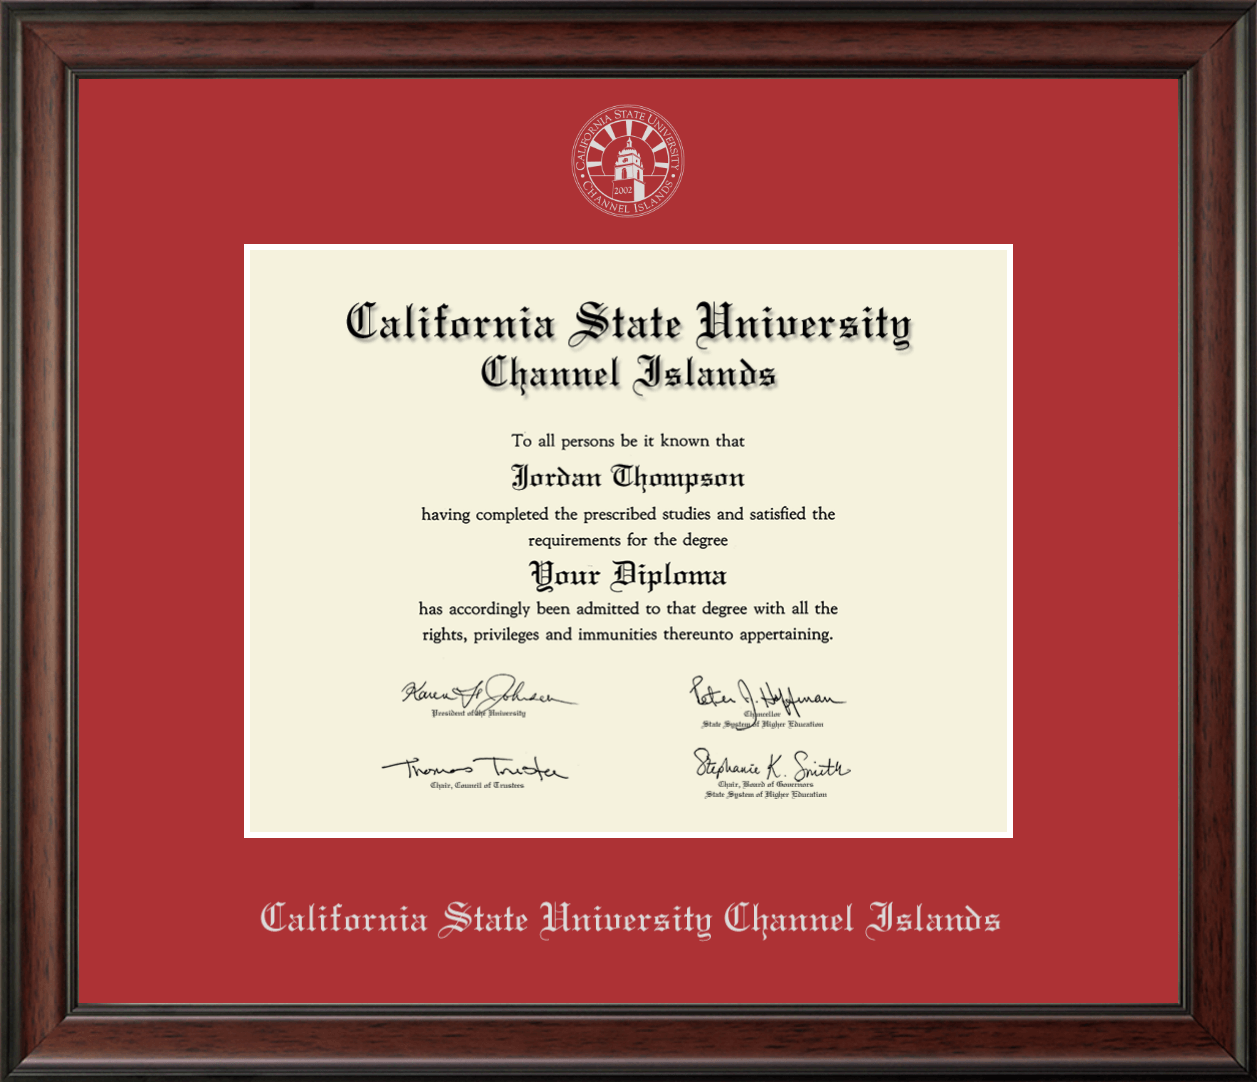 Diploma Frame Big CSUCI California State University Channel Islands Campus Photo Graduation Gift Case Embossed Picture Frames Engraving Bachelor Master MBA PHD Degree 